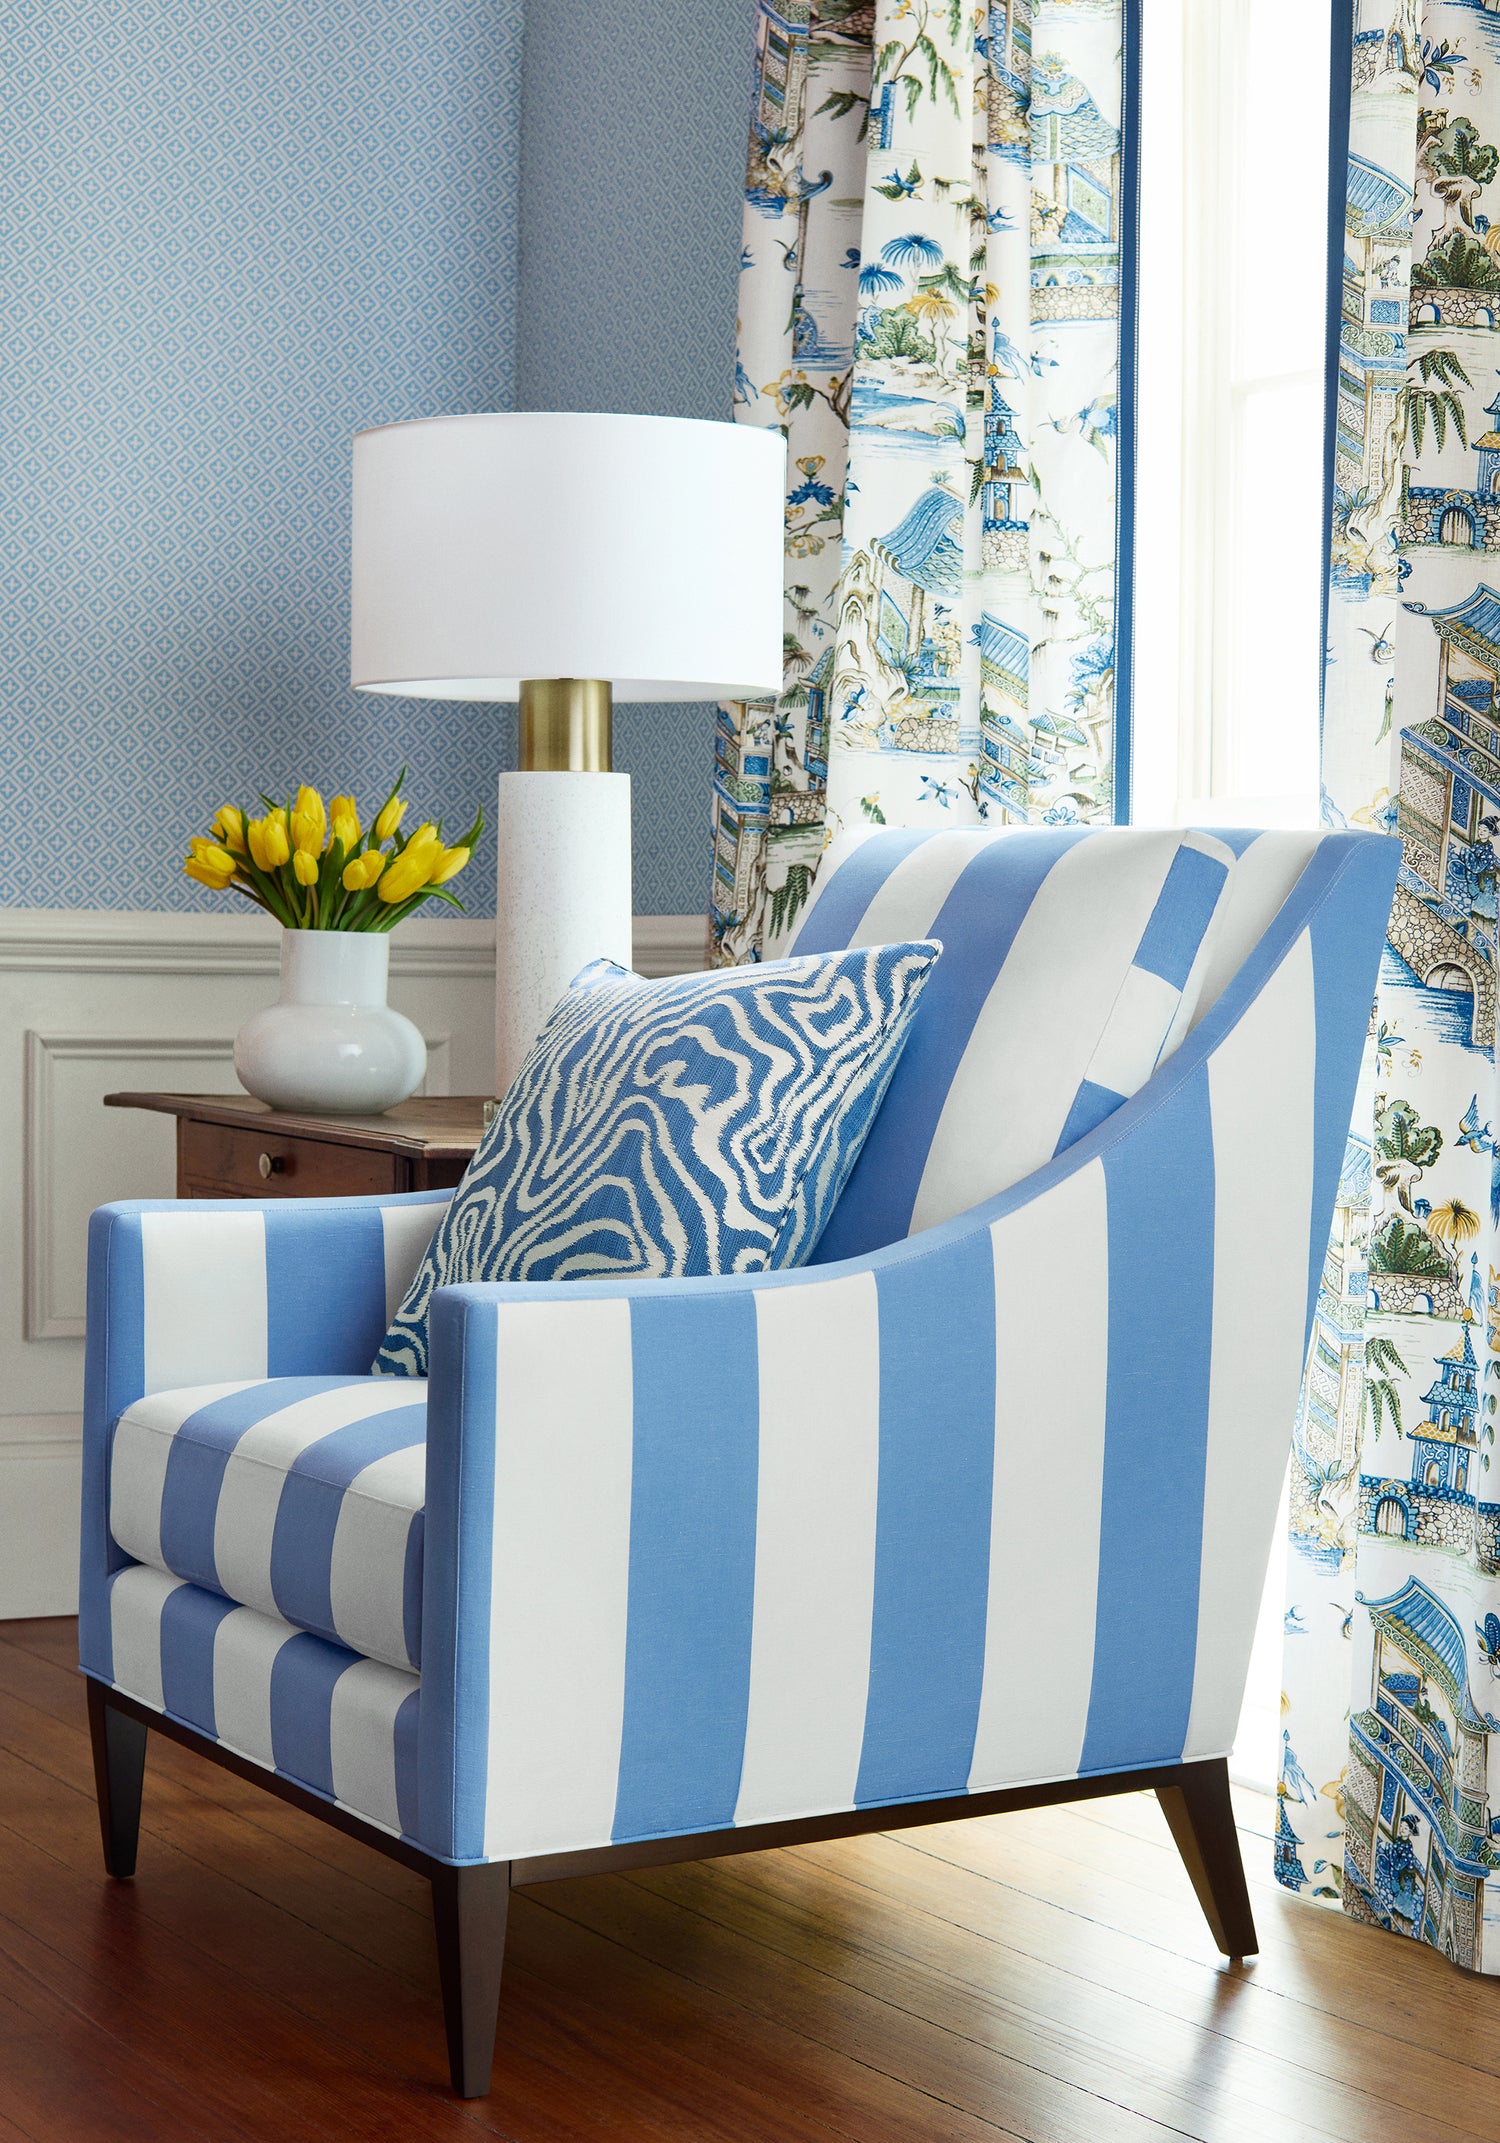 Carson Chair in Bergamo Stripe woven fabric in blue color - pattern number W713638 - by Thibaut in the Grand Palace collection